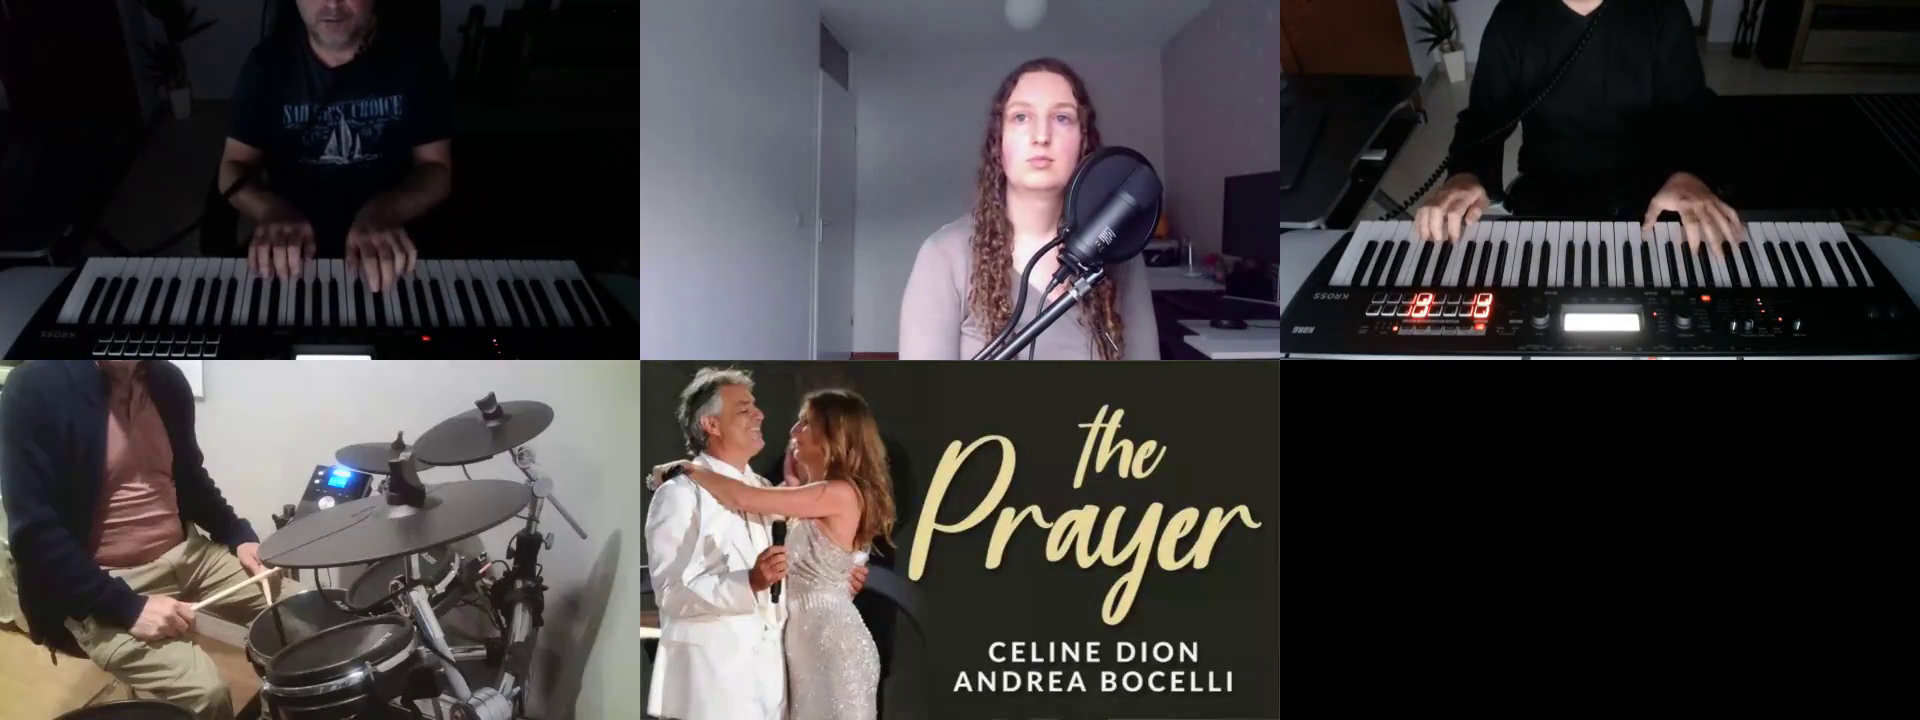 The prayer - Celine Dion and Andrea Bocelli